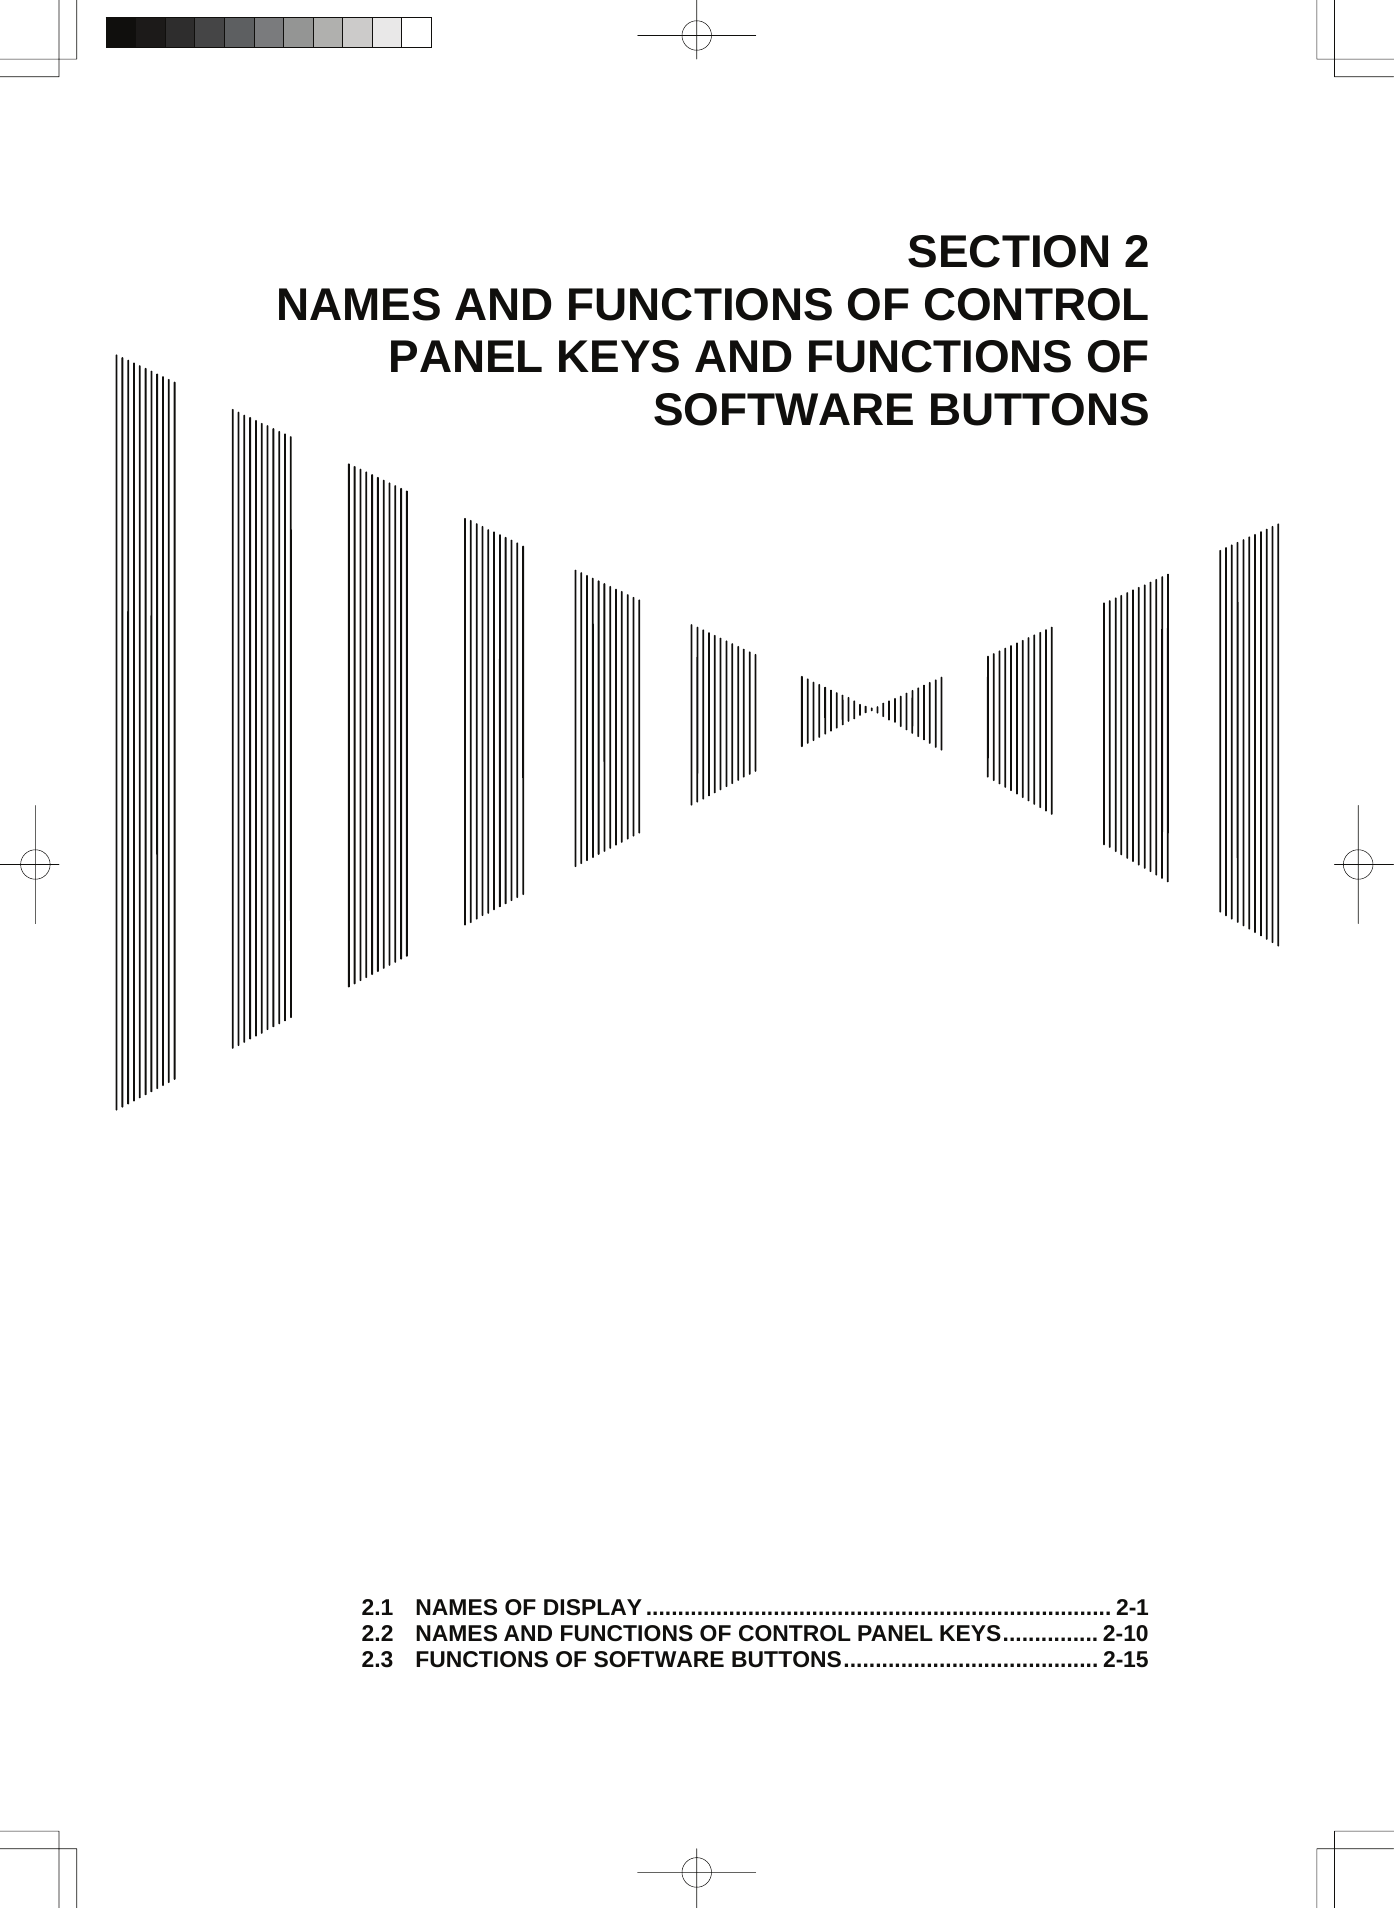  SECTION 2 NAMES AND FUNCTIONS OF CONTROL PANEL KEYS AND FUNCTIONS OF SOFTWARE BUTTONS                                             2.1 NAMES OF DISPLAY......................................................................... 2-1 2.2 NAMES AND FUNCTIONS OF CONTROL PANEL KEYS............... 2-10 2.3 FUNCTIONS OF SOFTWARE BUTTONS........................................ 2-15 